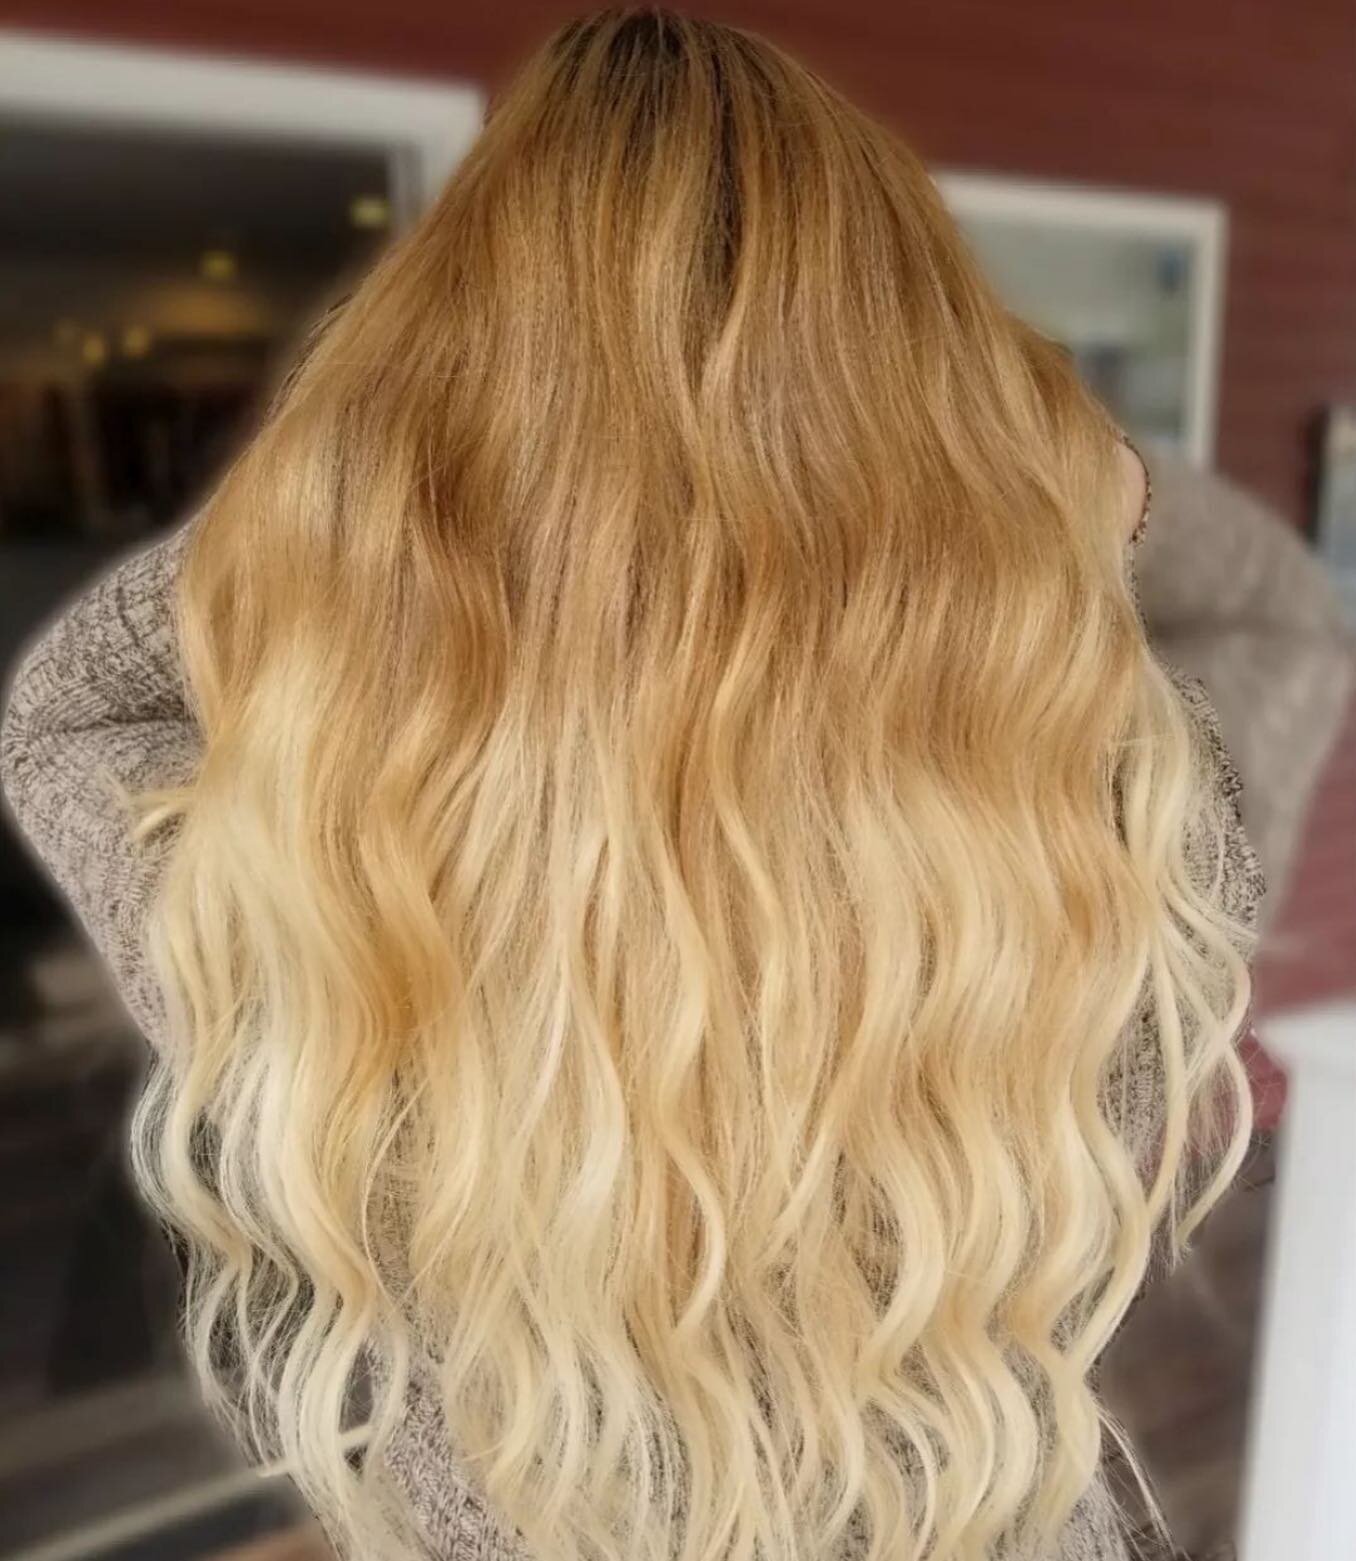 Copper to Blonde Ombr&eacute; with a full head of tape in extensions by Deborah!! 🤩 To get that longer thicker hair you have been dreaming of call the salon to schedule a free consultation with Deb! 

#babeextensionsbinghamton #hairextensionsbingham